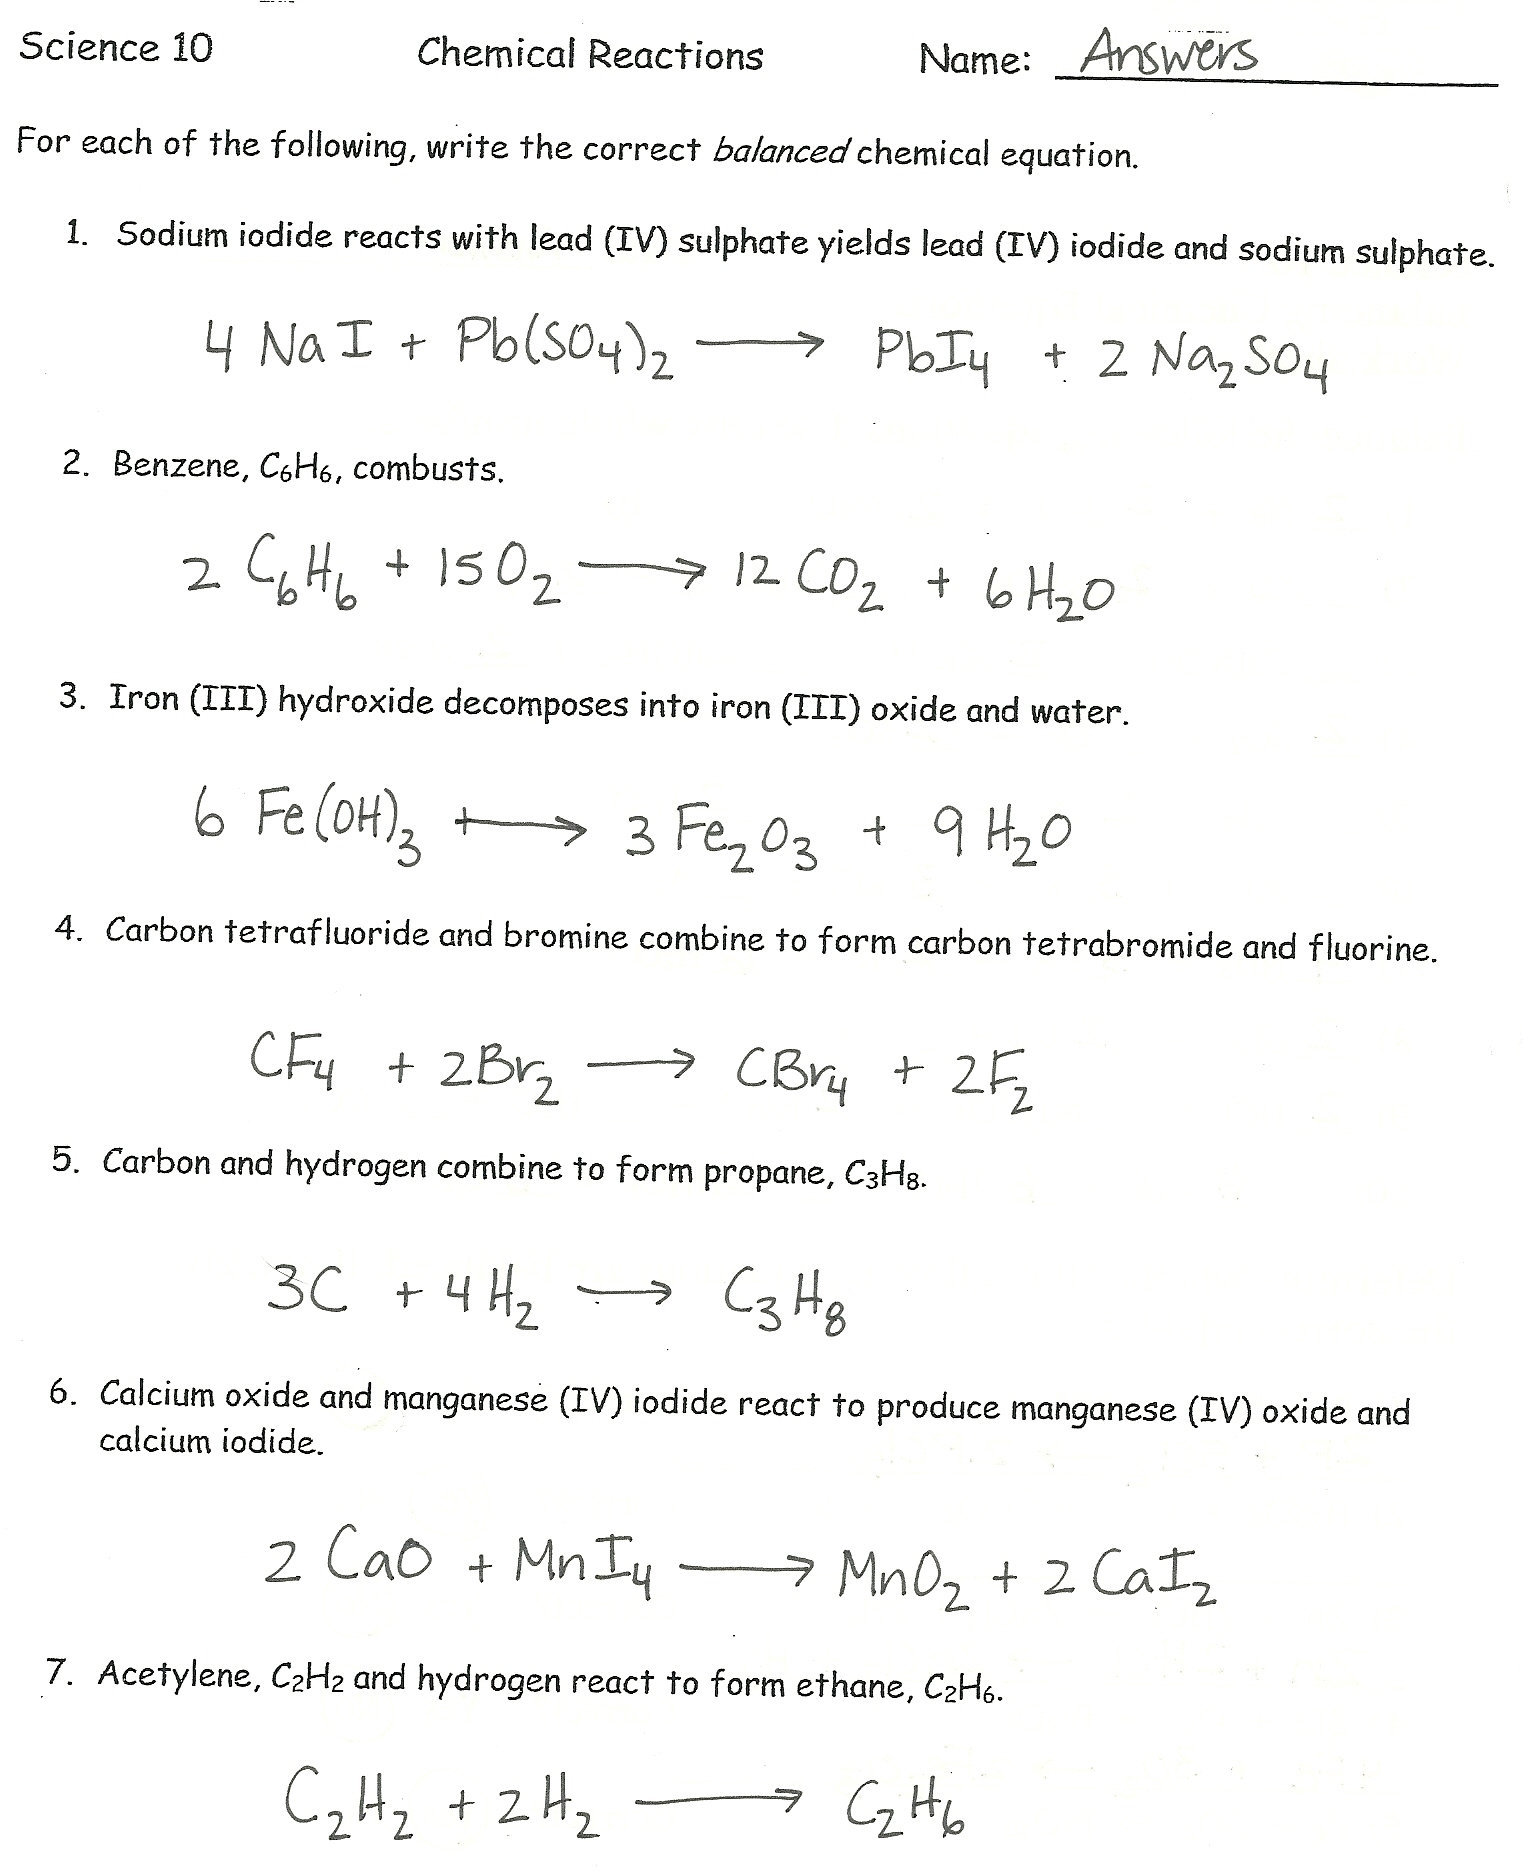 Writing Chemical Equations Worksheet 2 Answers